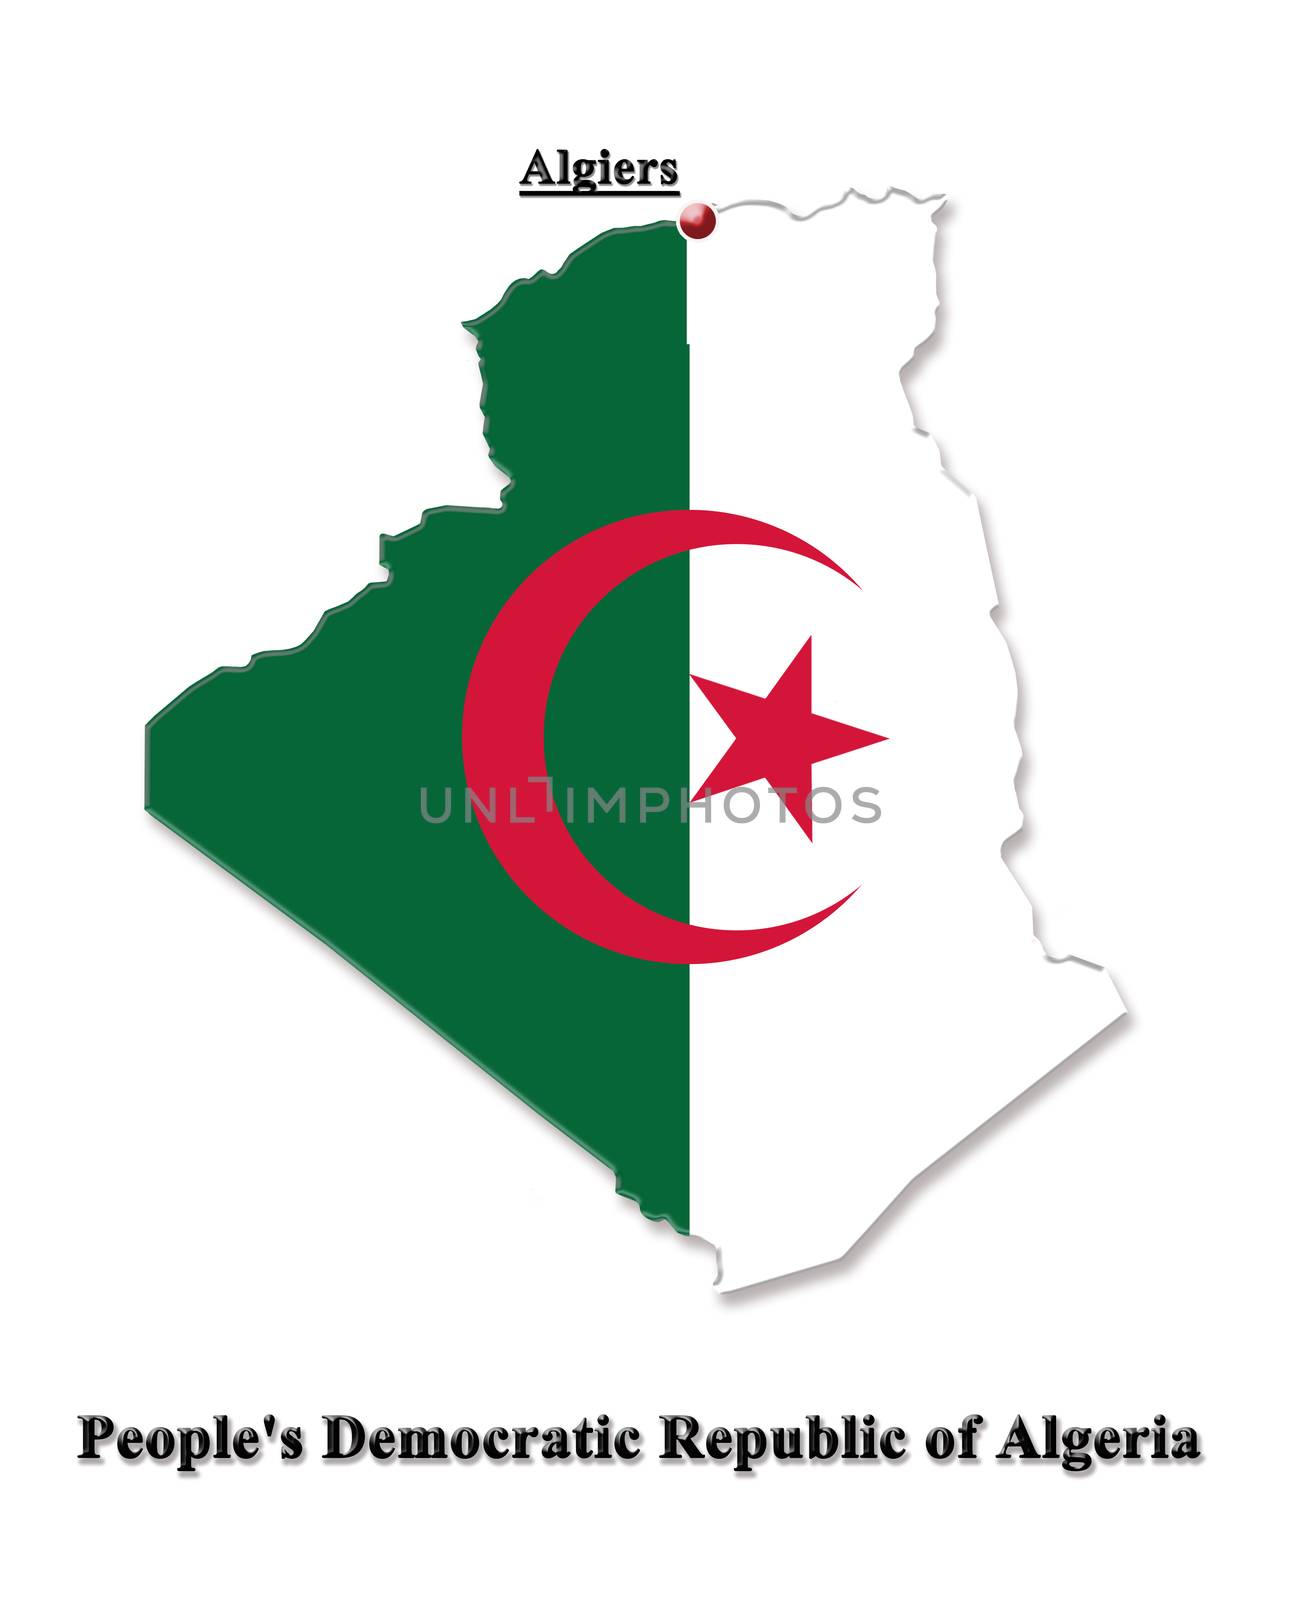 map of People's Democratic Republic of Algeria in colors of its flag isolated on white